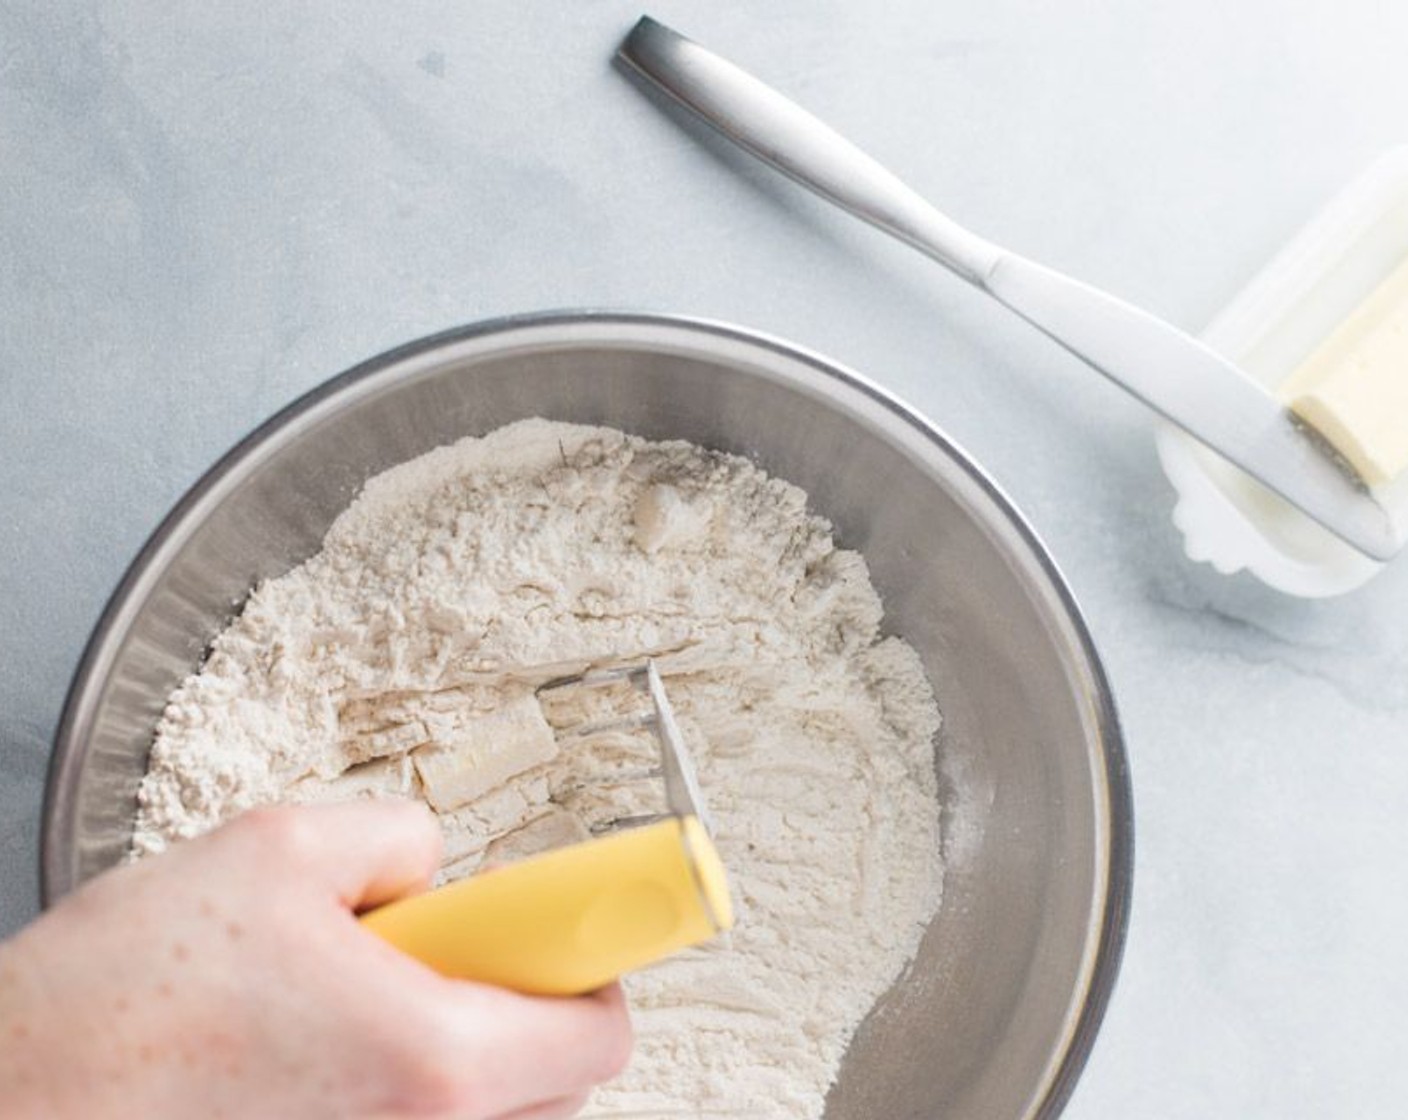 step 2 Add Butter (1 Tbsp) and cut into flour with a pastry knife until well incorporated.